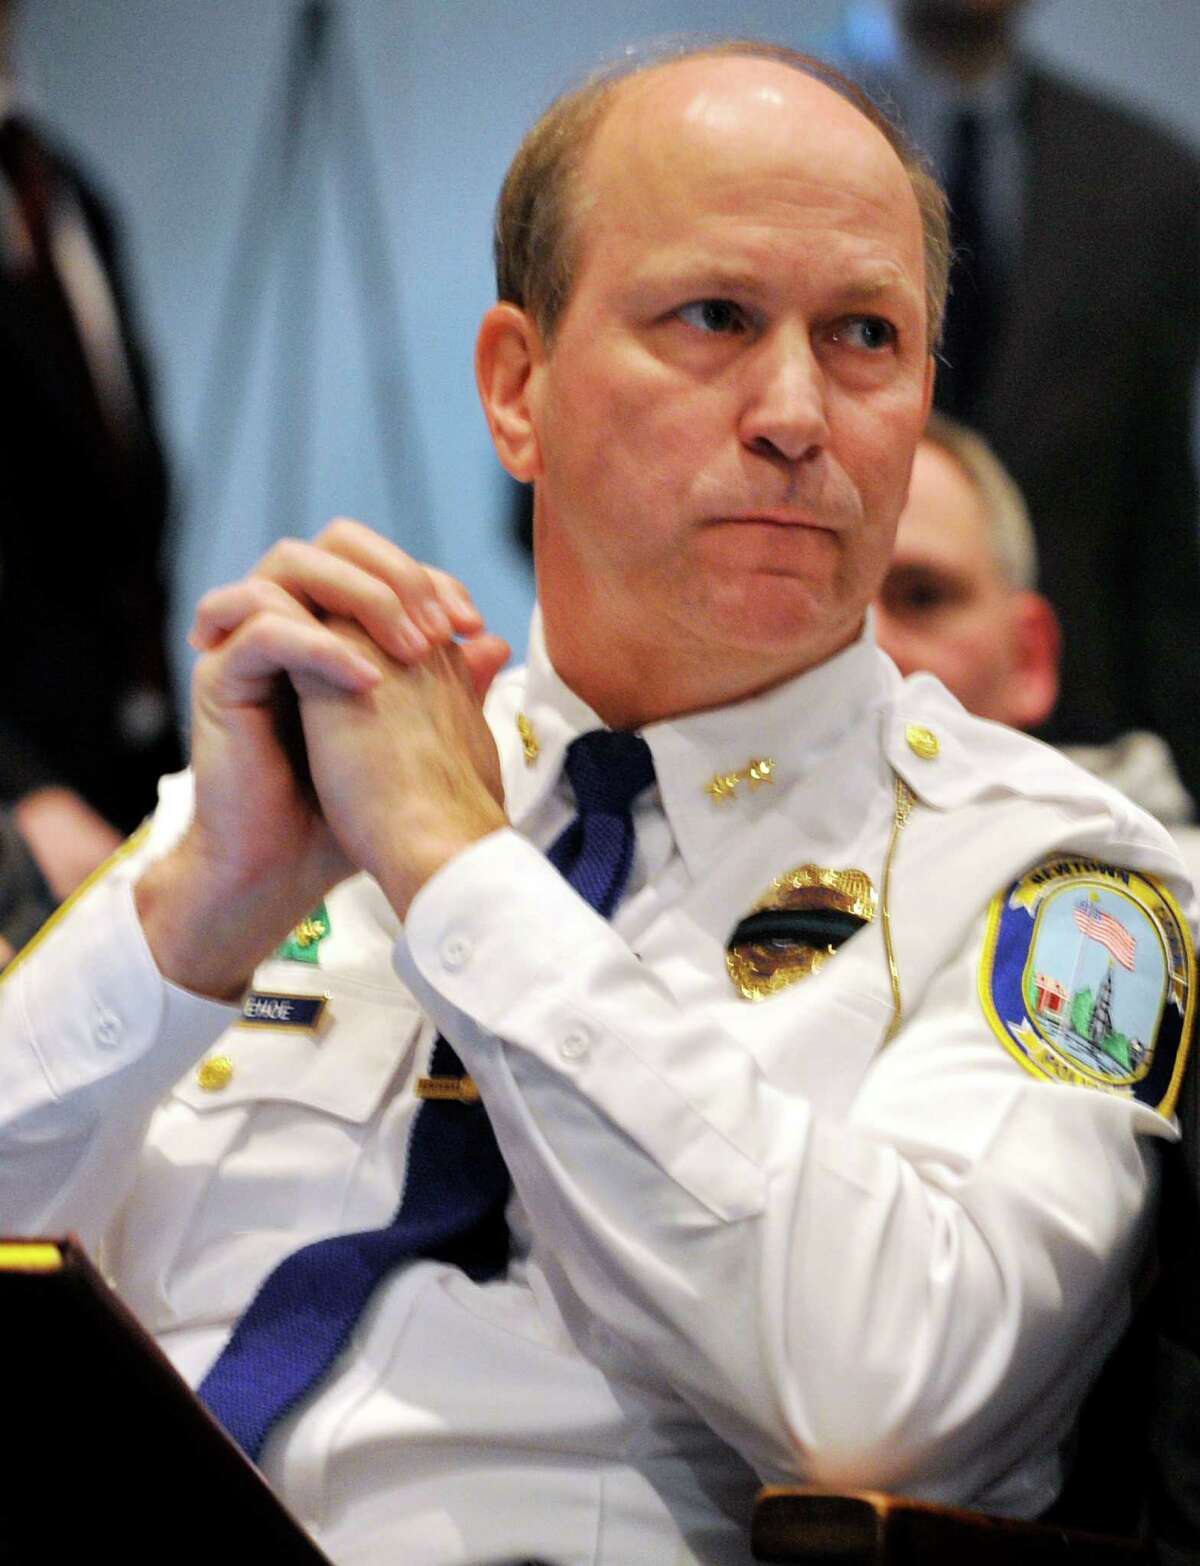 Newtown Police Chief Michael Kehoe